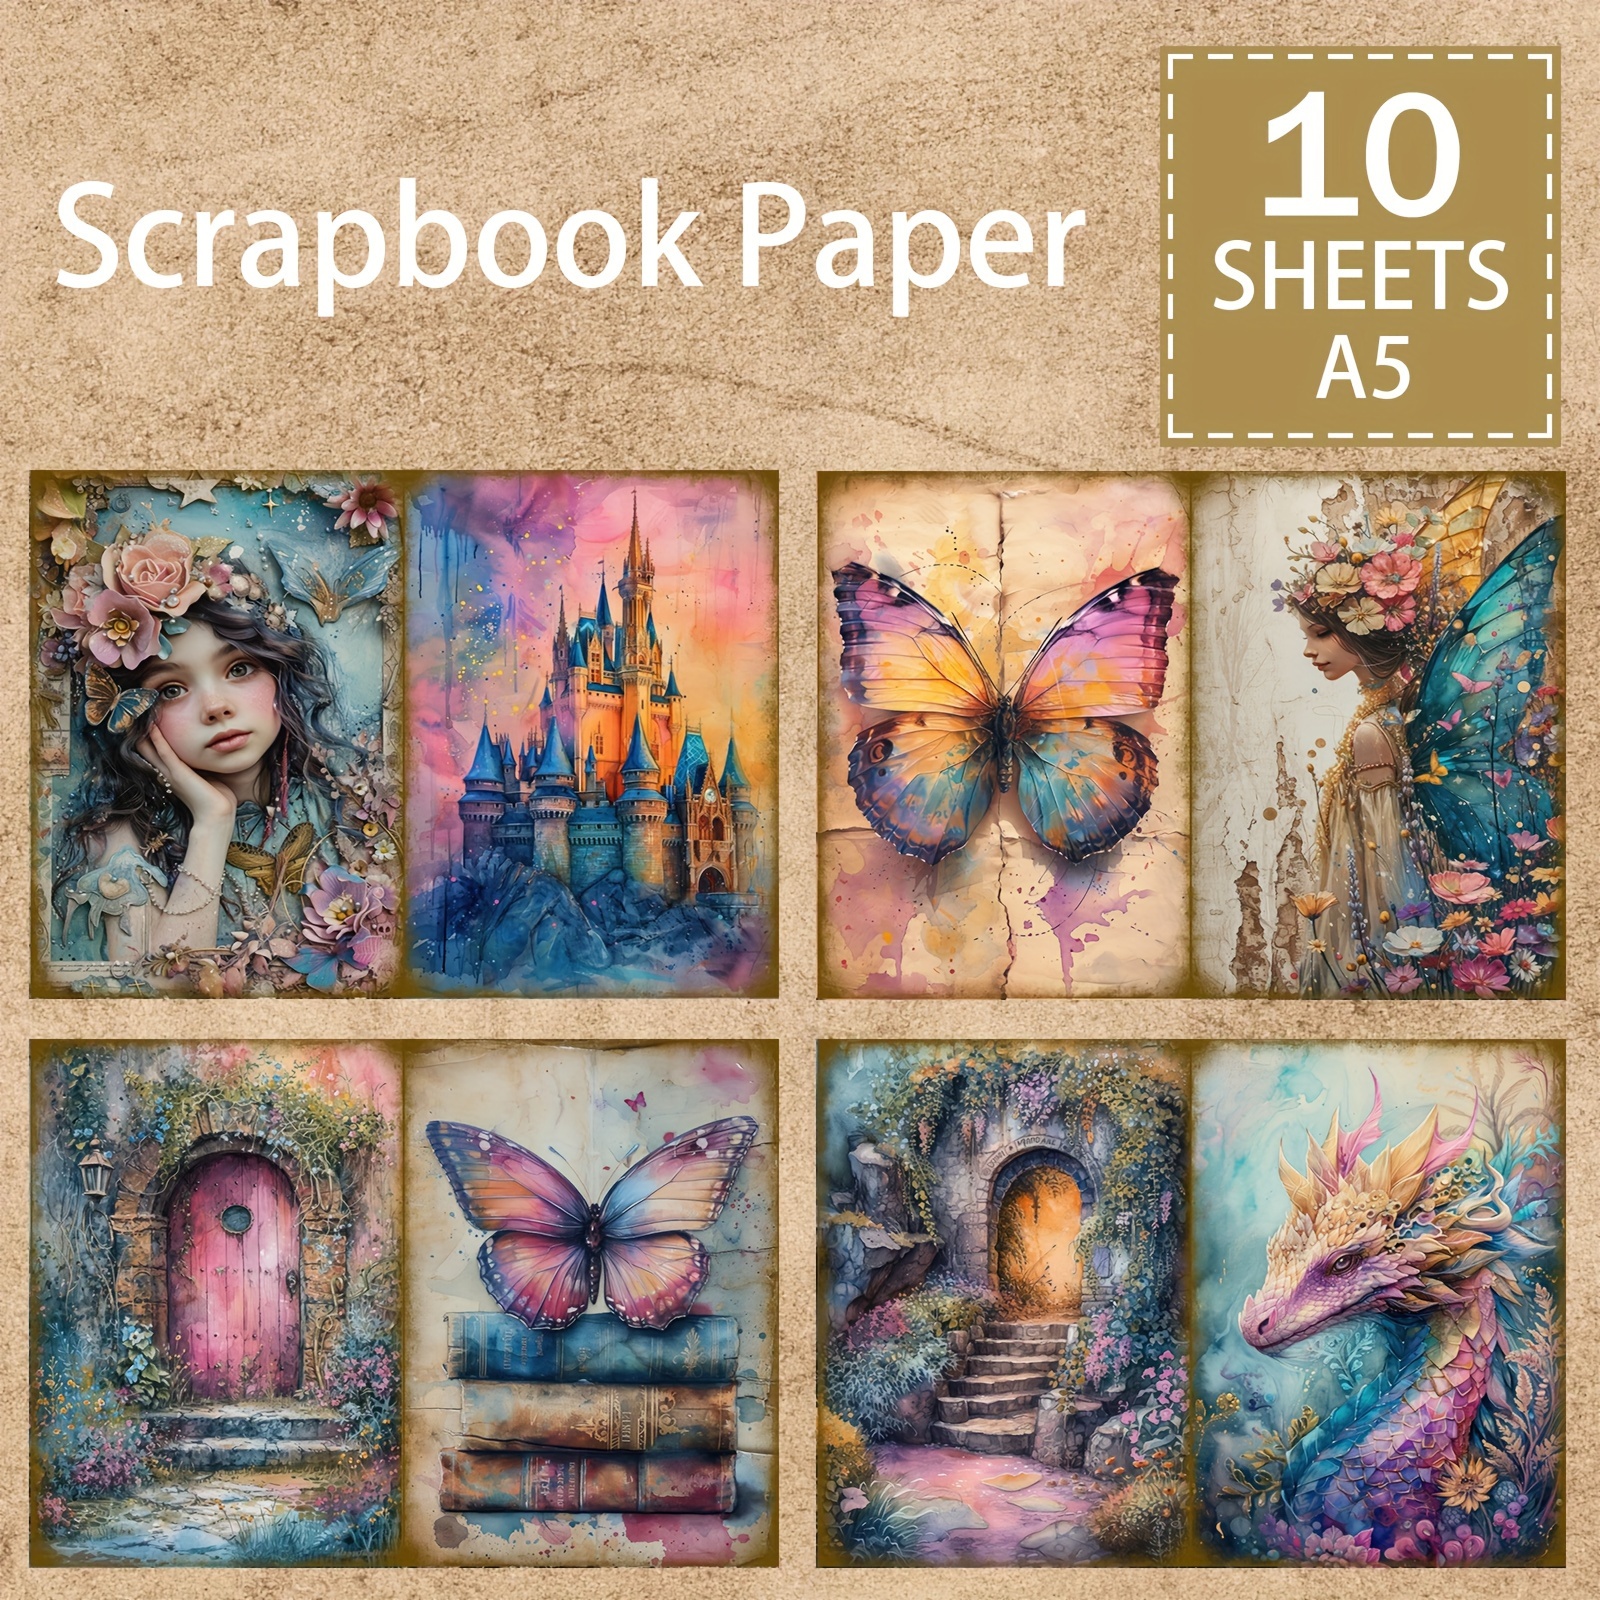 

Fantasy Scrapbook Paper Pack - 10 Sheets A5, Castle And Butterfly Designs, Vintage Diary Backgrounds, Creative Diy Cardstock For Planners, Greeting Cards And Art Projects